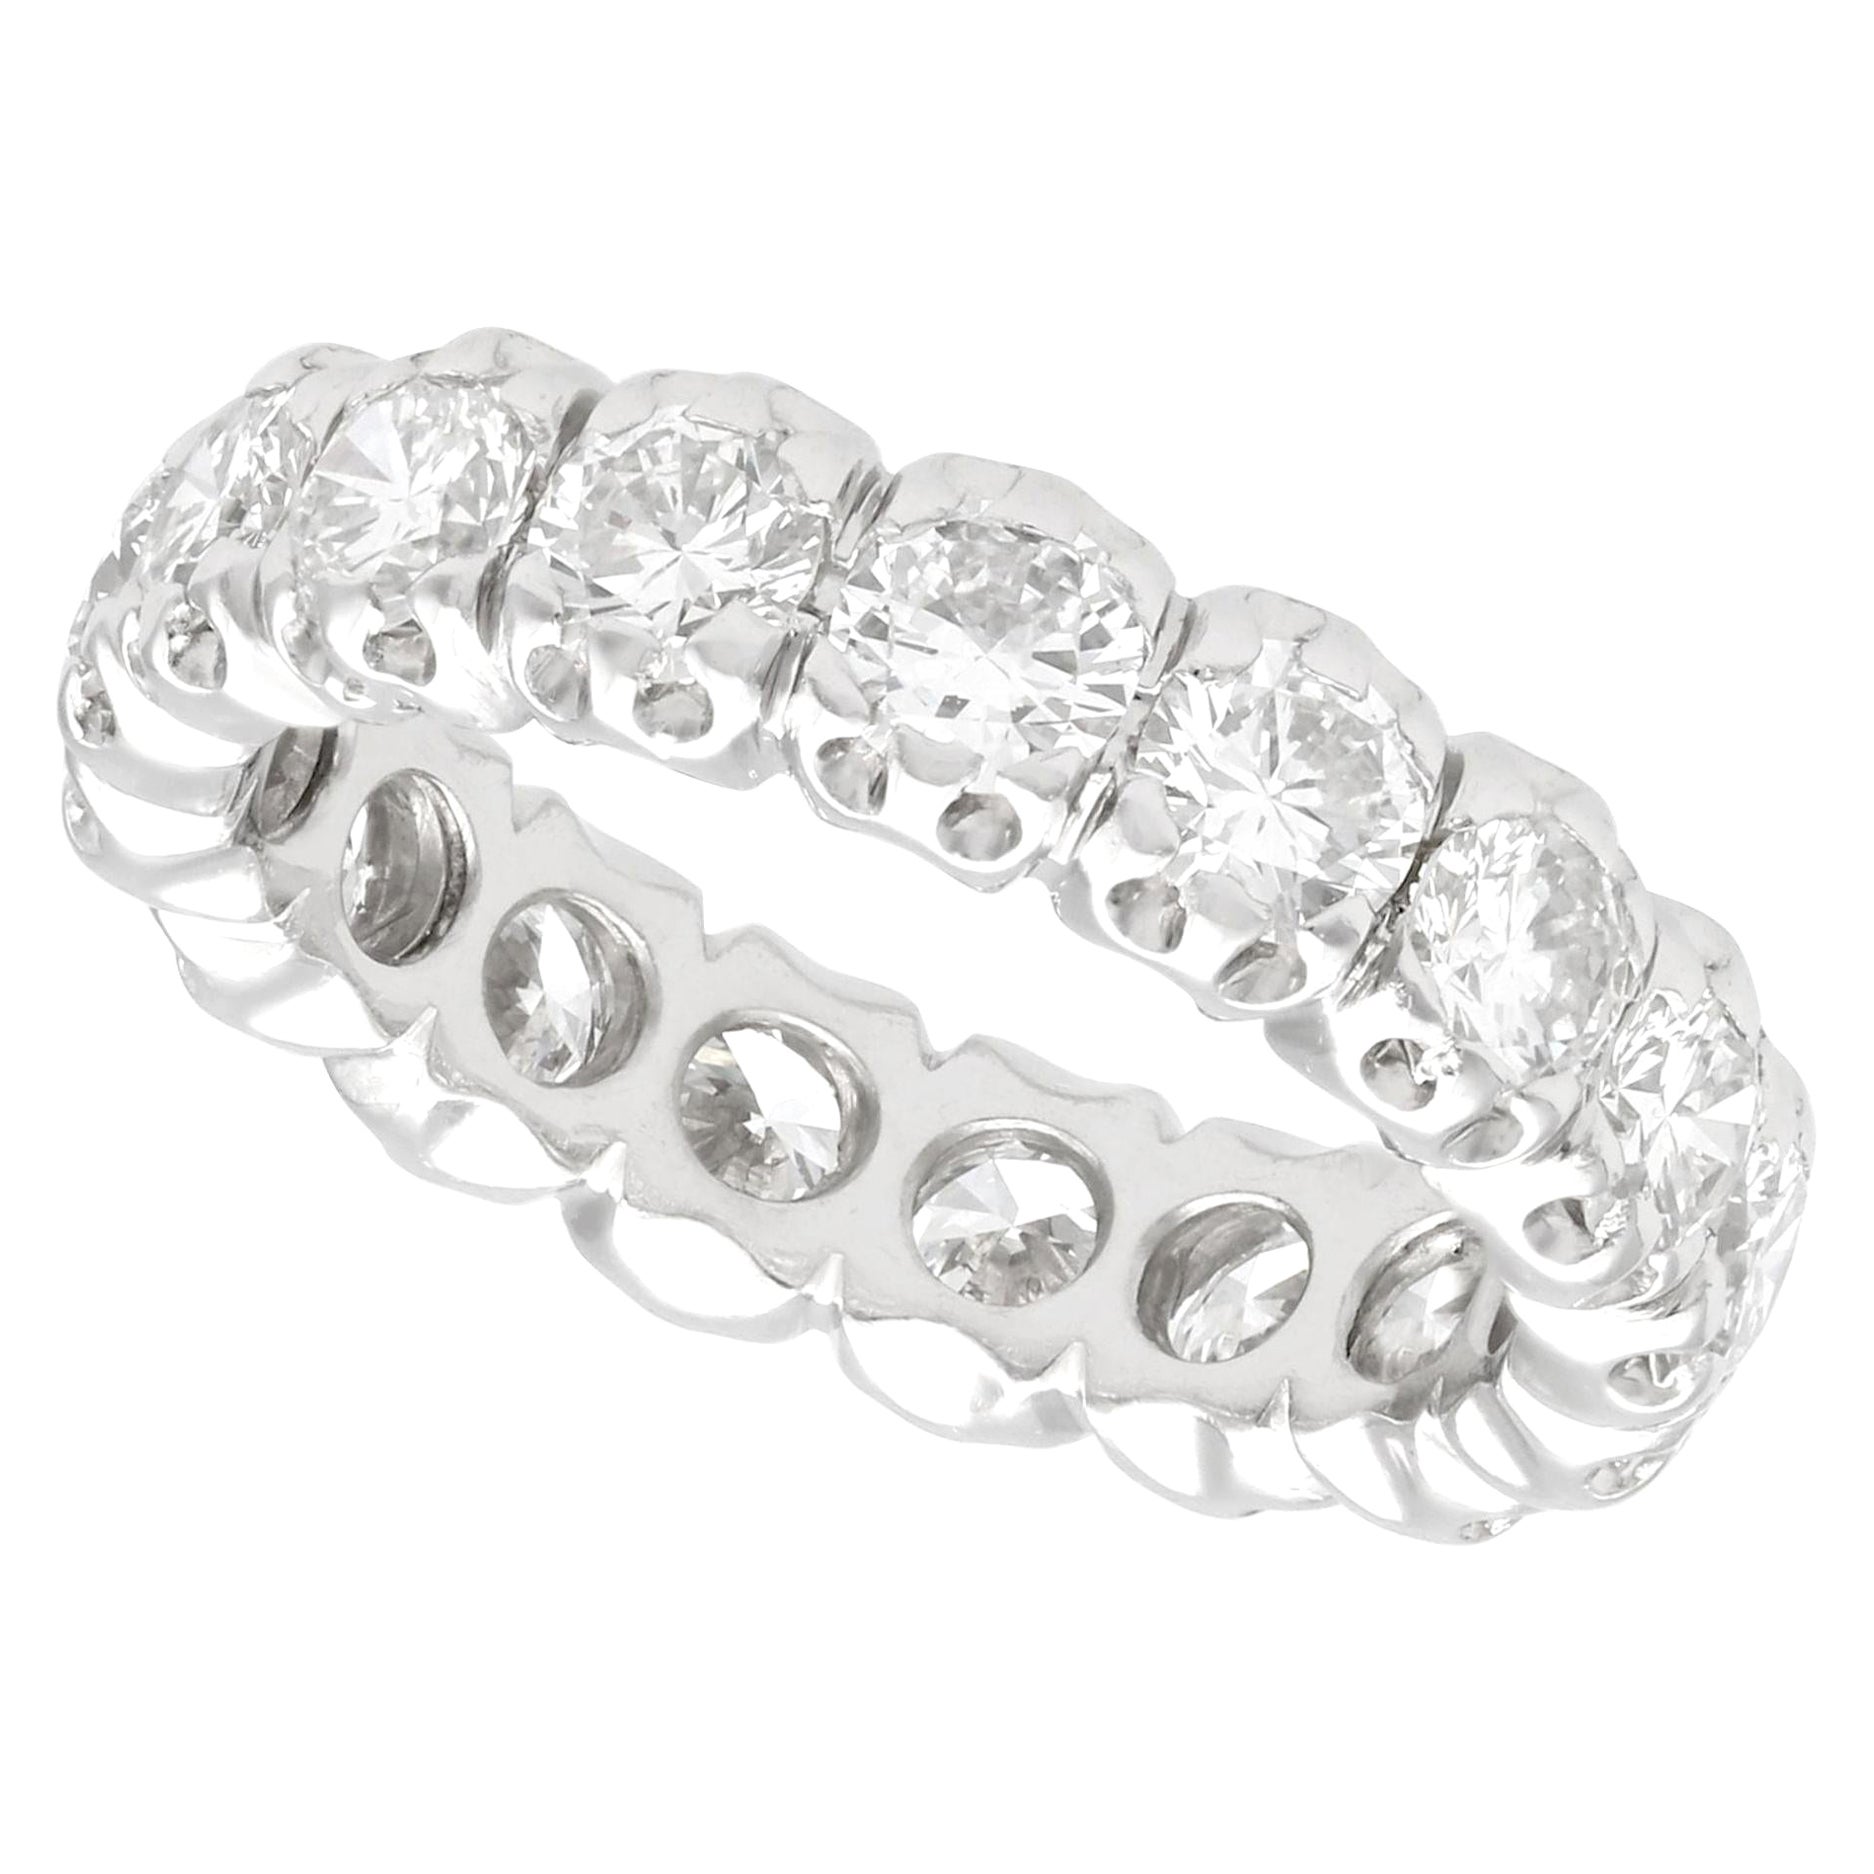 Vintage French 2.20 Carat Diamond and White Gold Full Eternity Ring